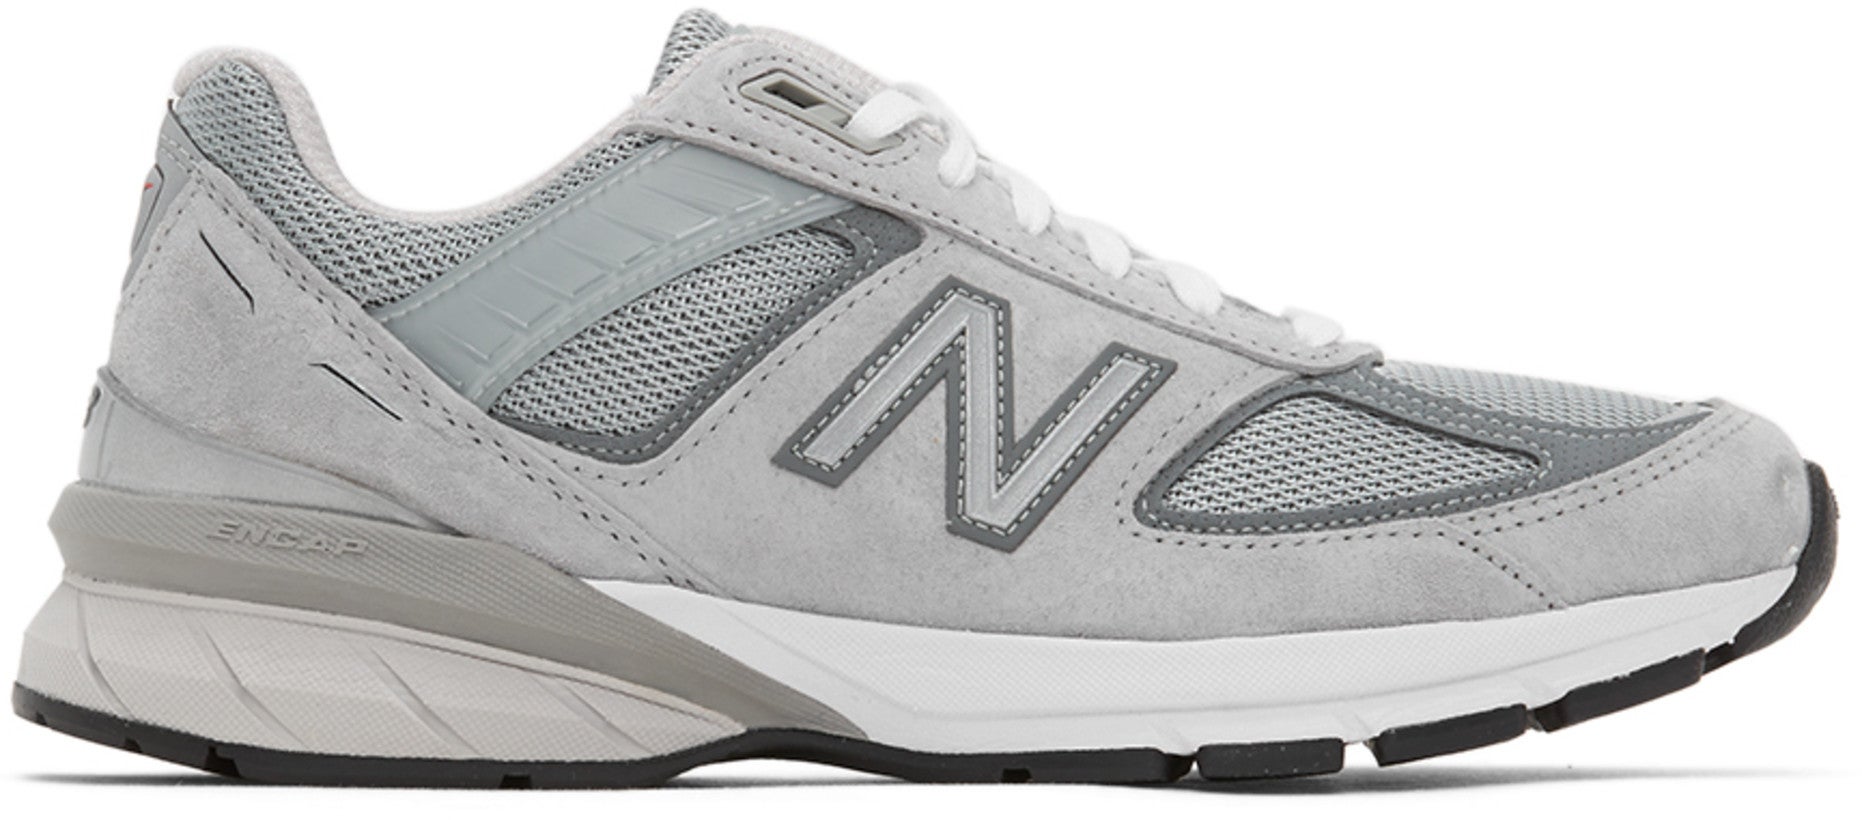 New Balance + Grey Made In US 990 v5 Sneakers